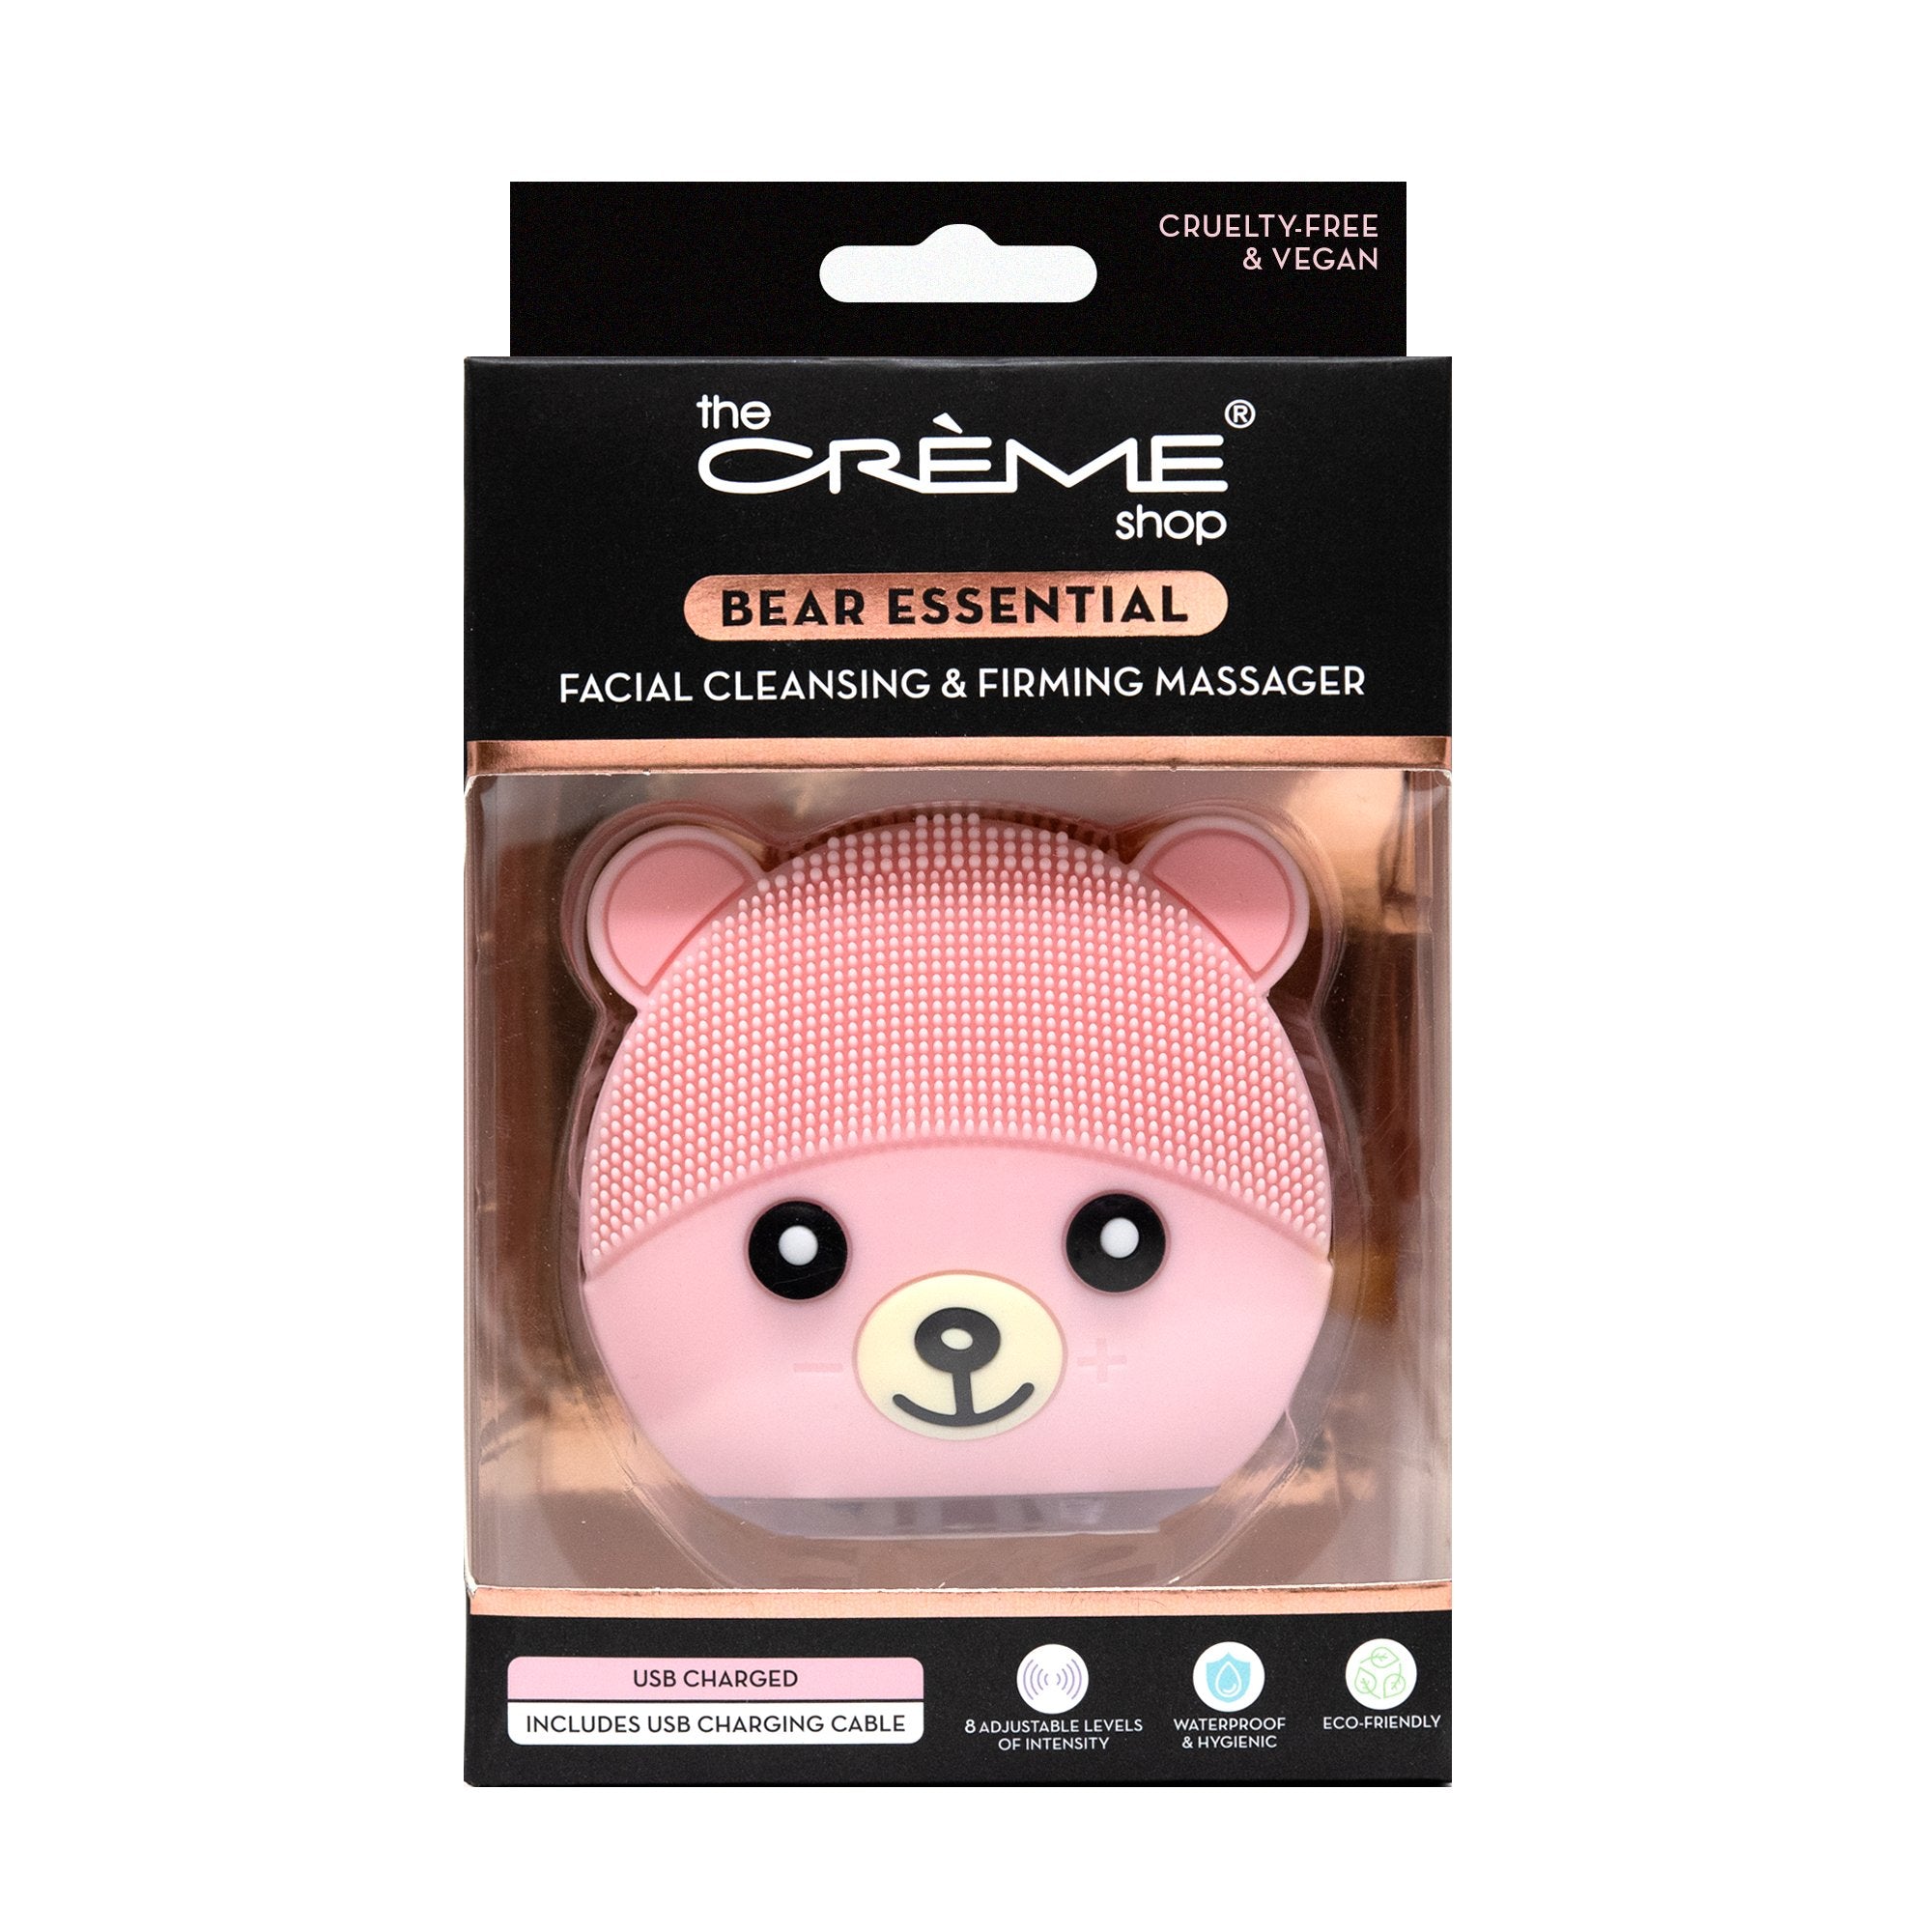 Bear Essential Facial Cleansing & Firming Massager | Cruelty-Free & Vegan Skincare Cleansing Pad The Crème Shop 